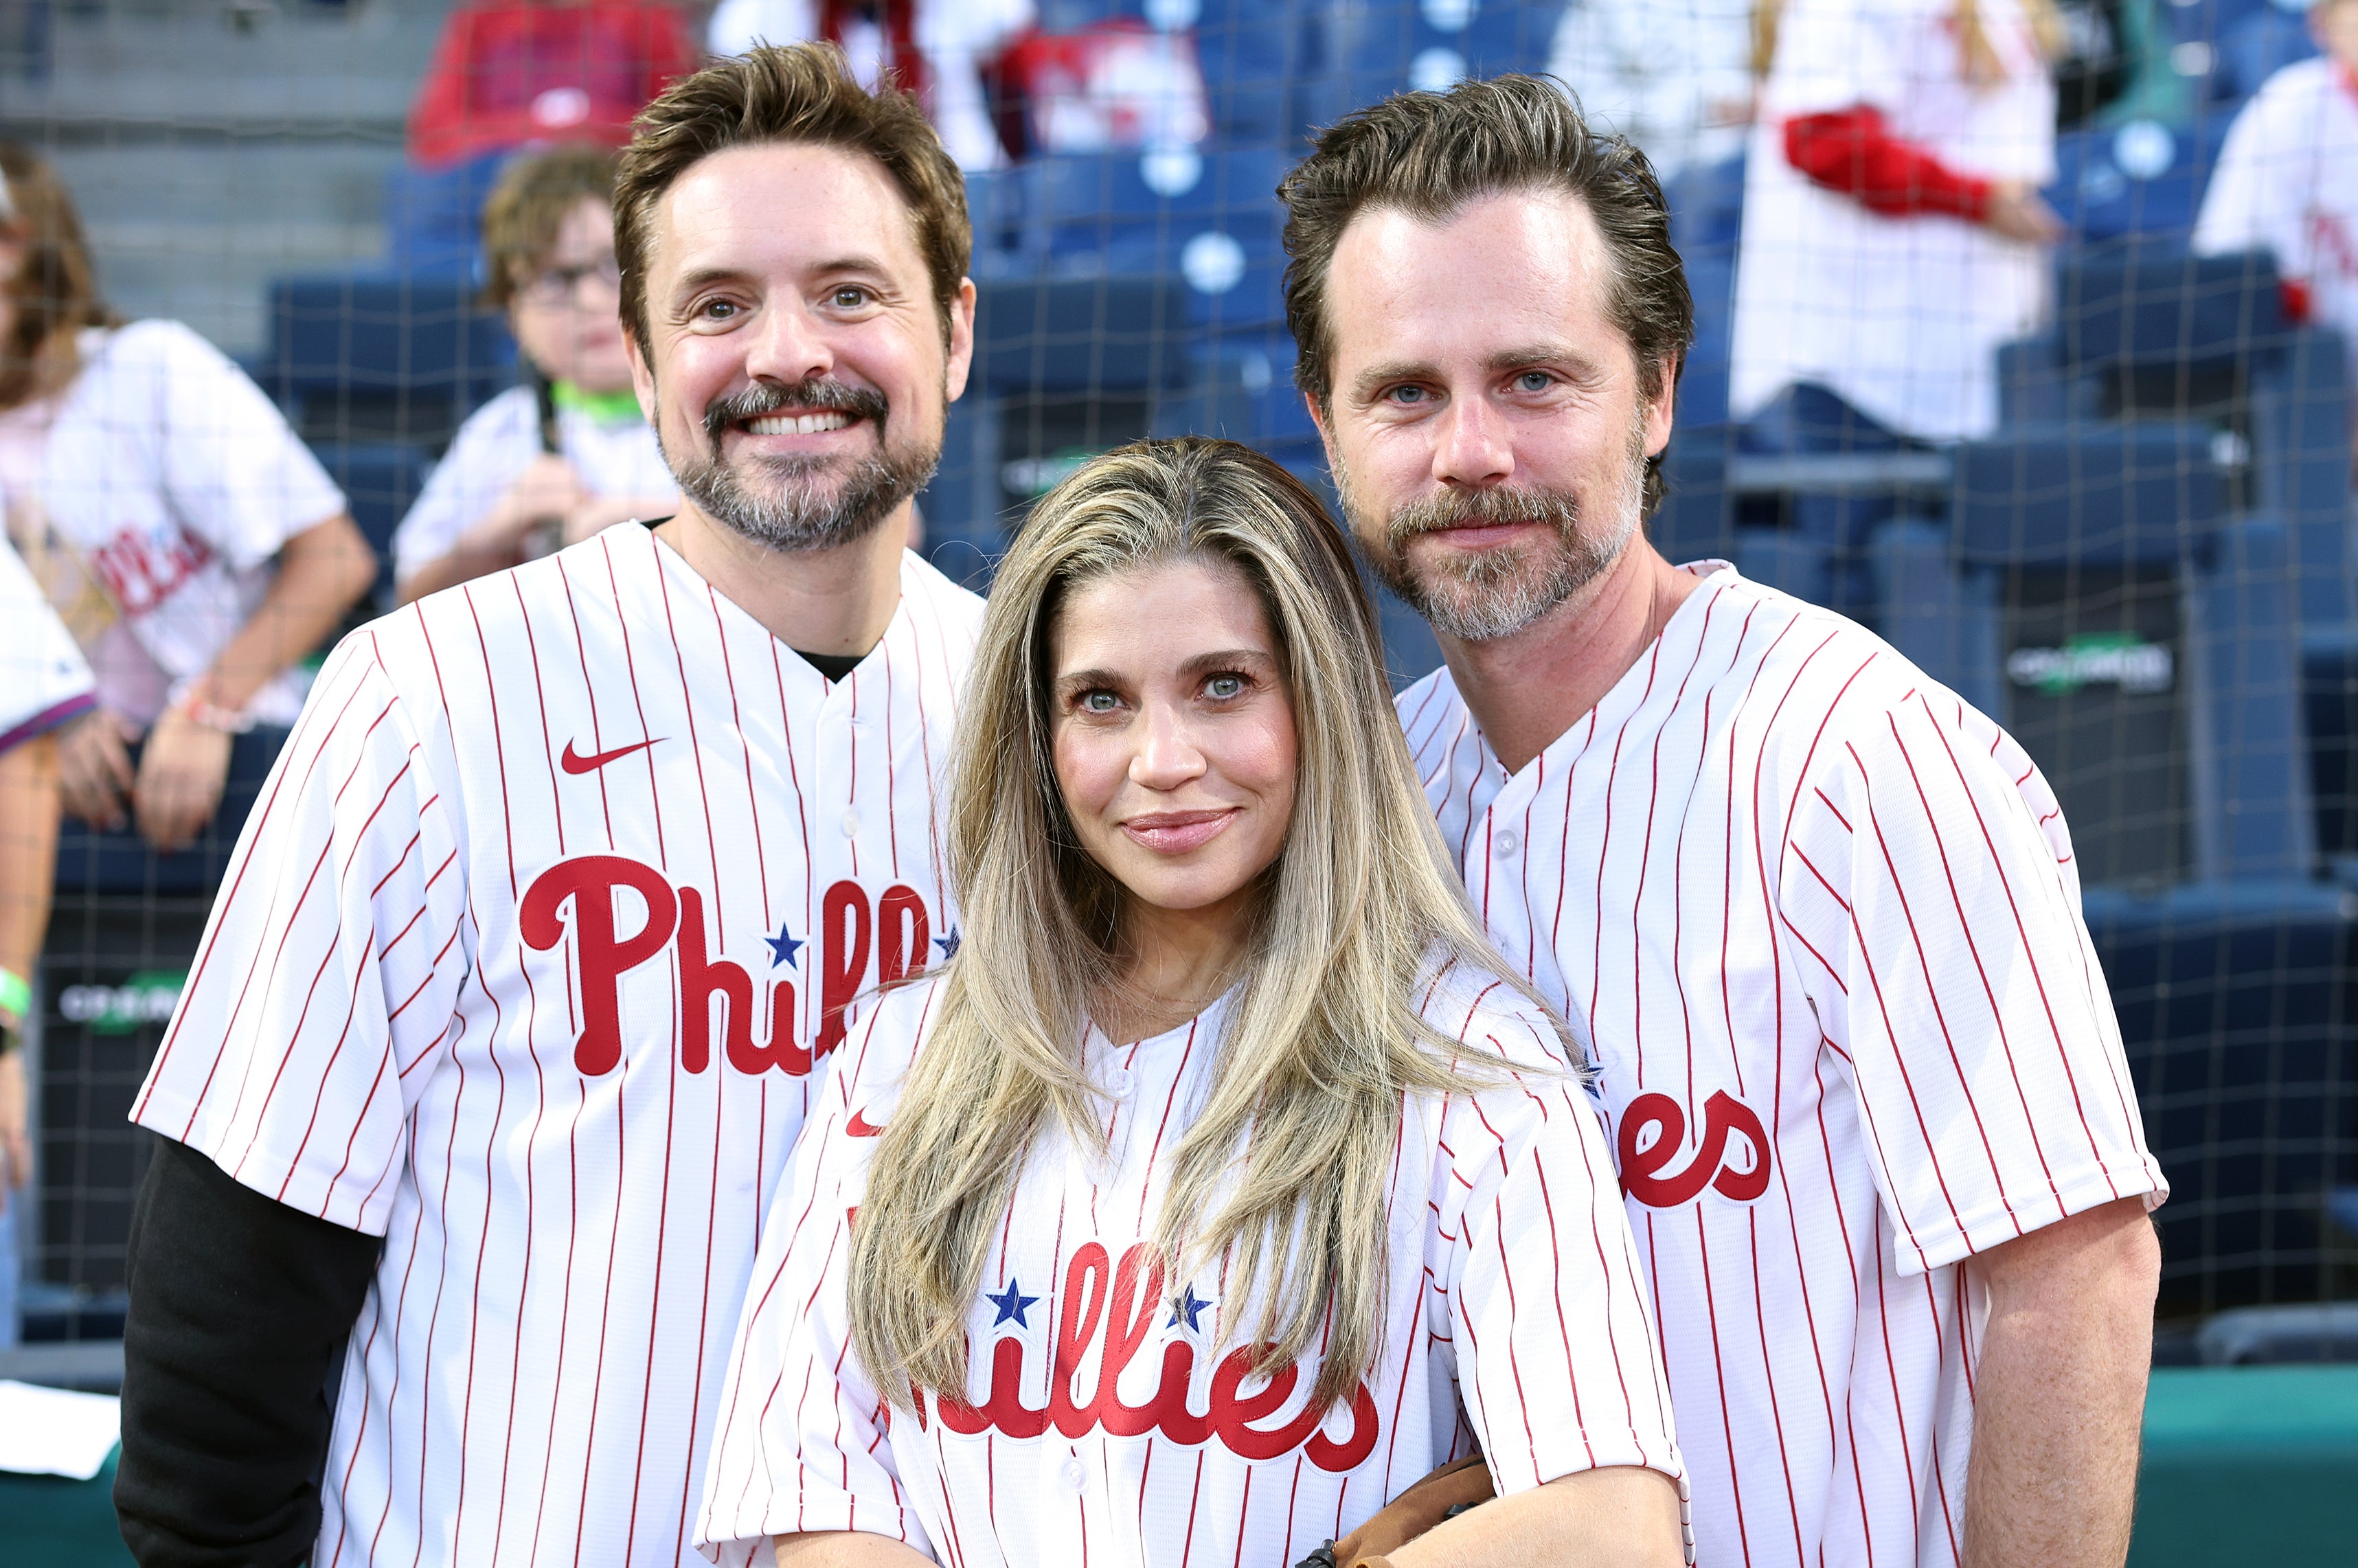 Will Friedle, Danielle Fishel, and Rider Strong in baseball uniforms